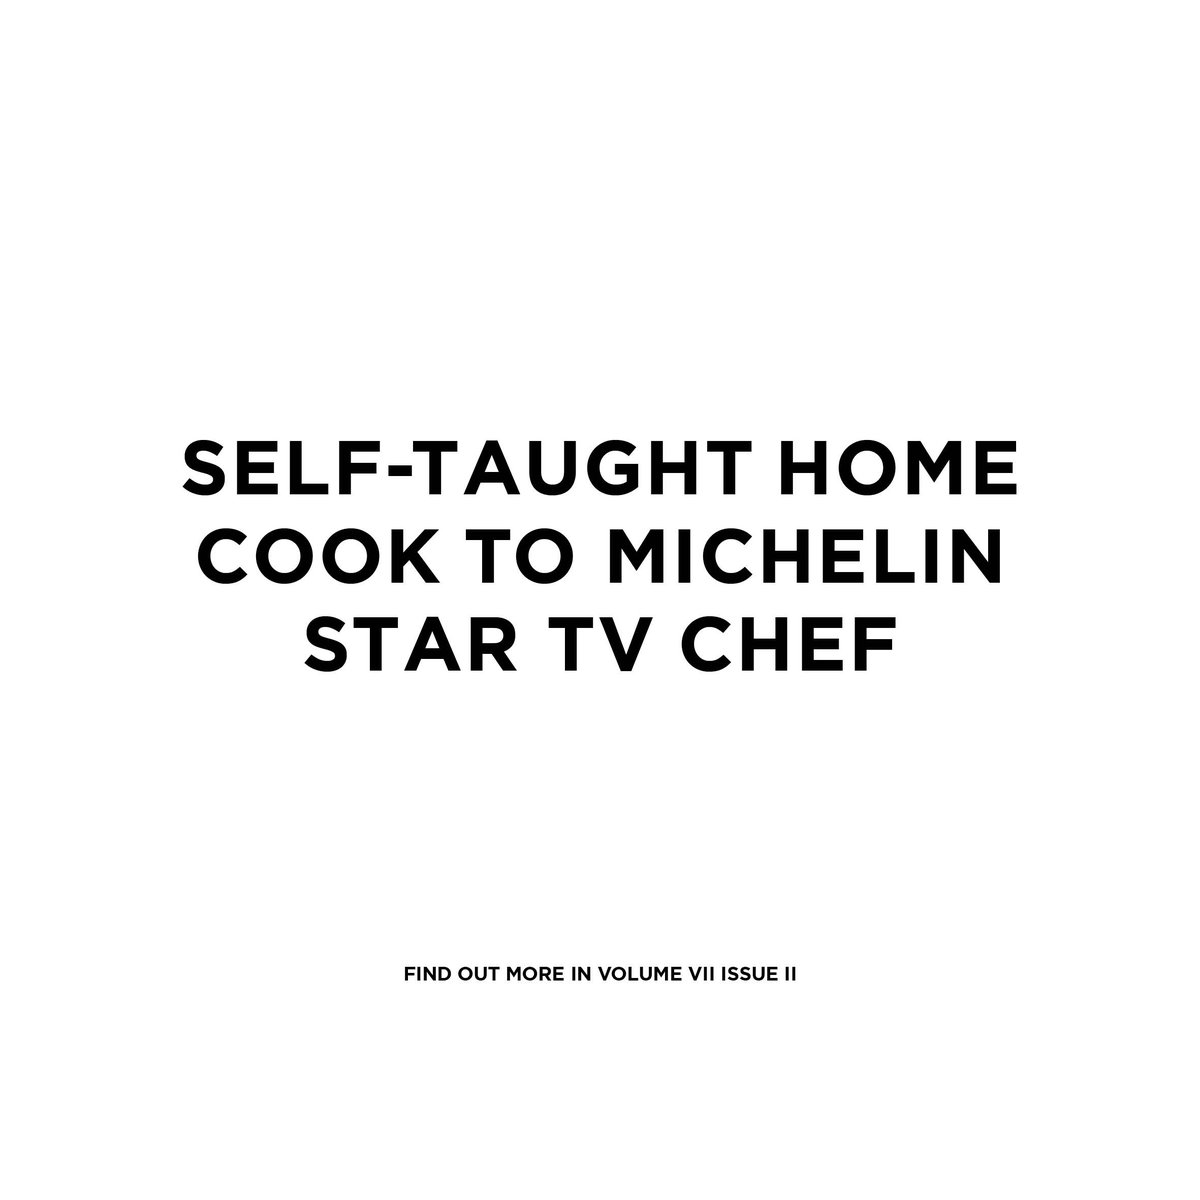 Self-taught home cook to Michelin star TV chef. Read more in the latest issue of Fieldsports Journal, out now.